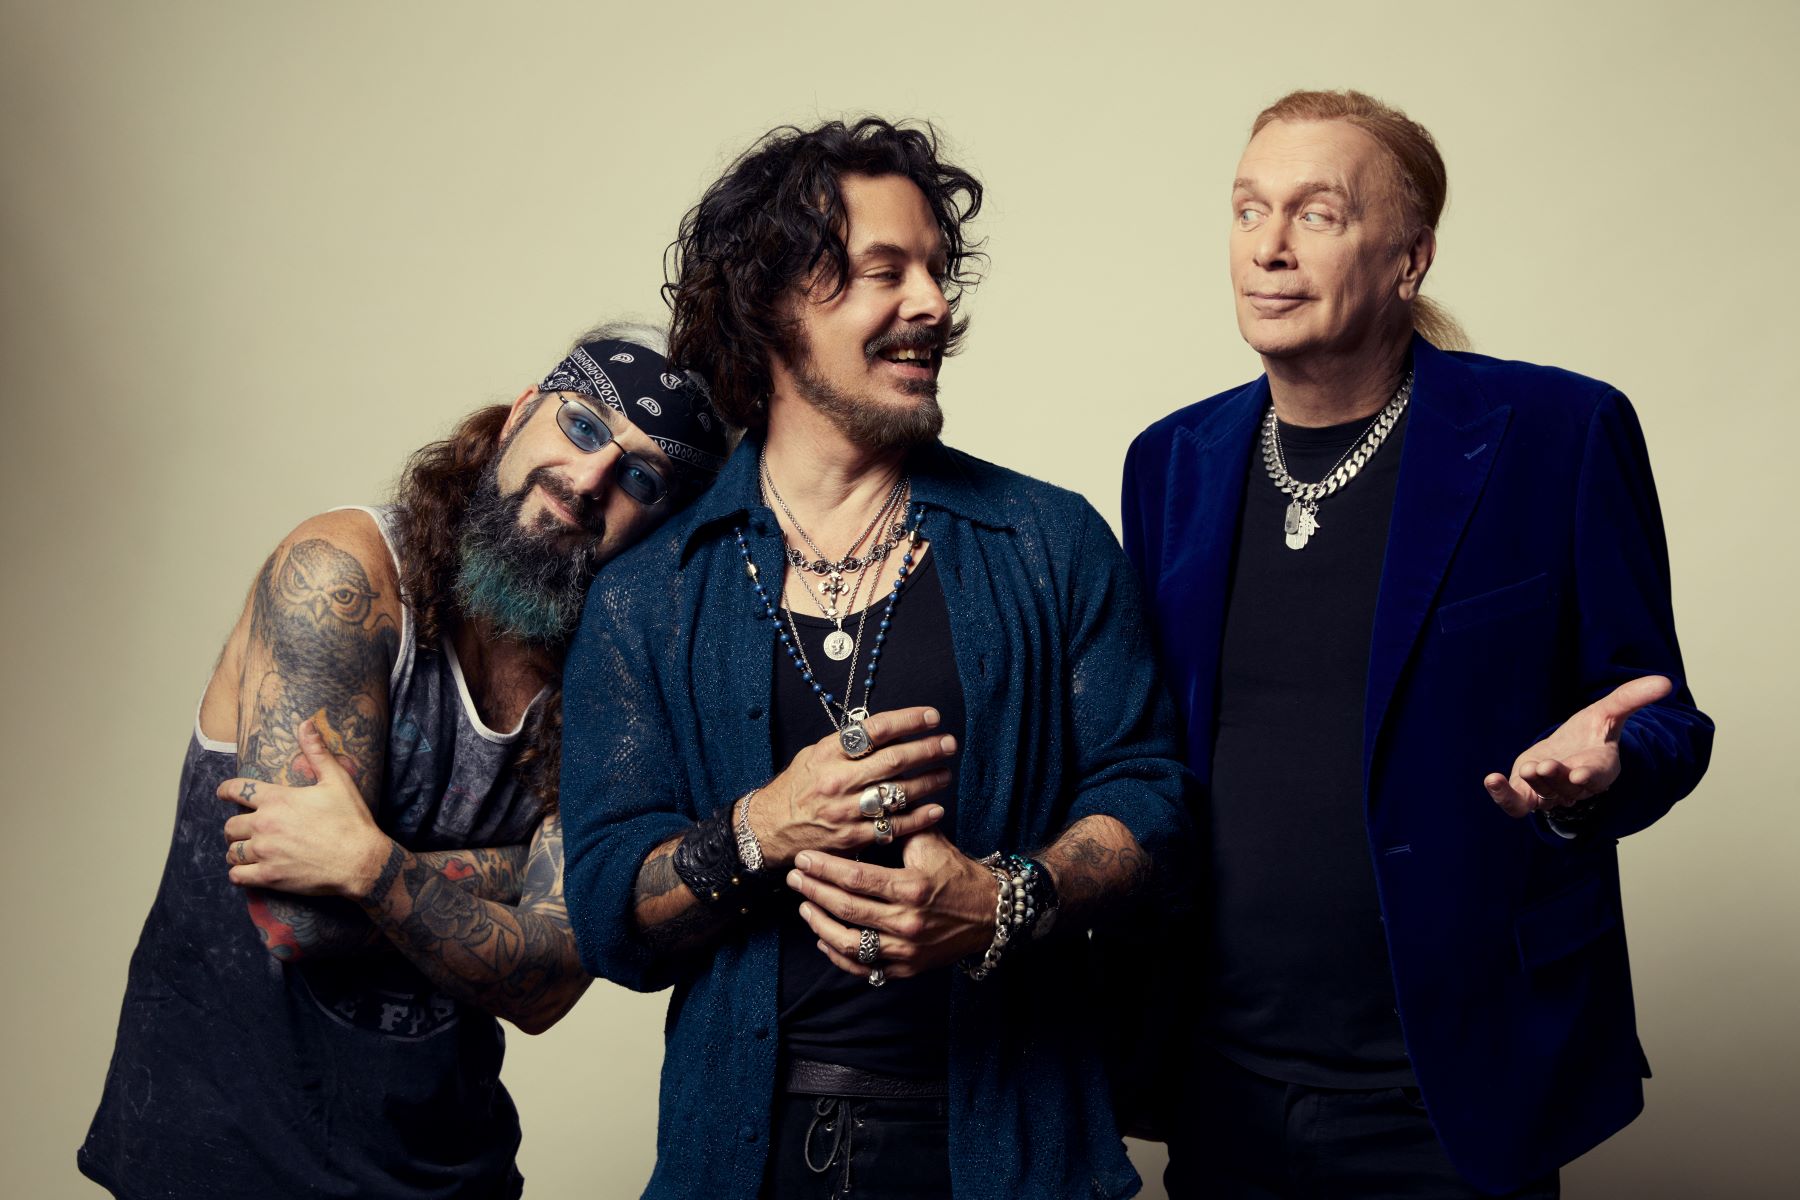  The Winery Dogs Coming to OTown